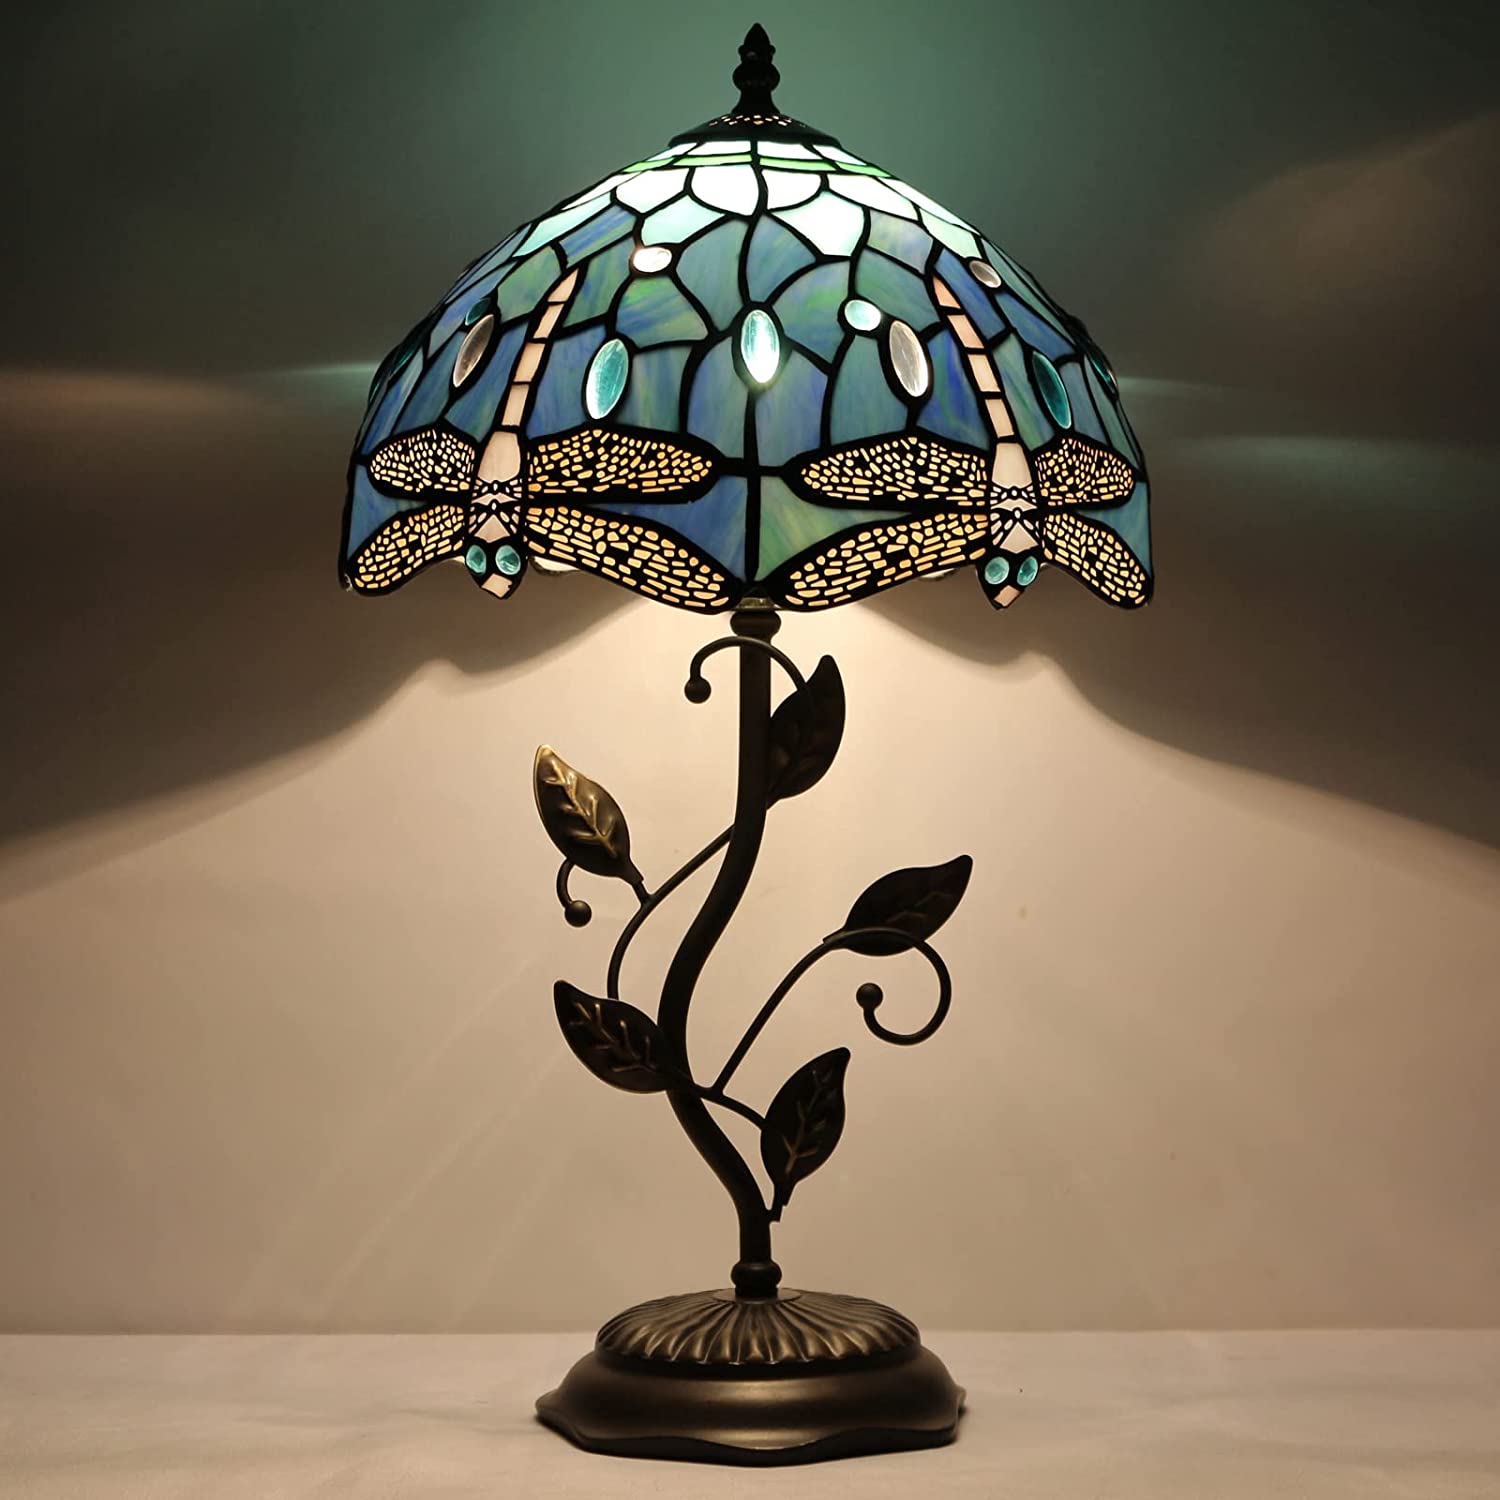 Tiffany Table Lamp, Stained Glass Lamp, Blue Dragonfly Desk Light W12H19 Inch Antique Iron Metal Leaves